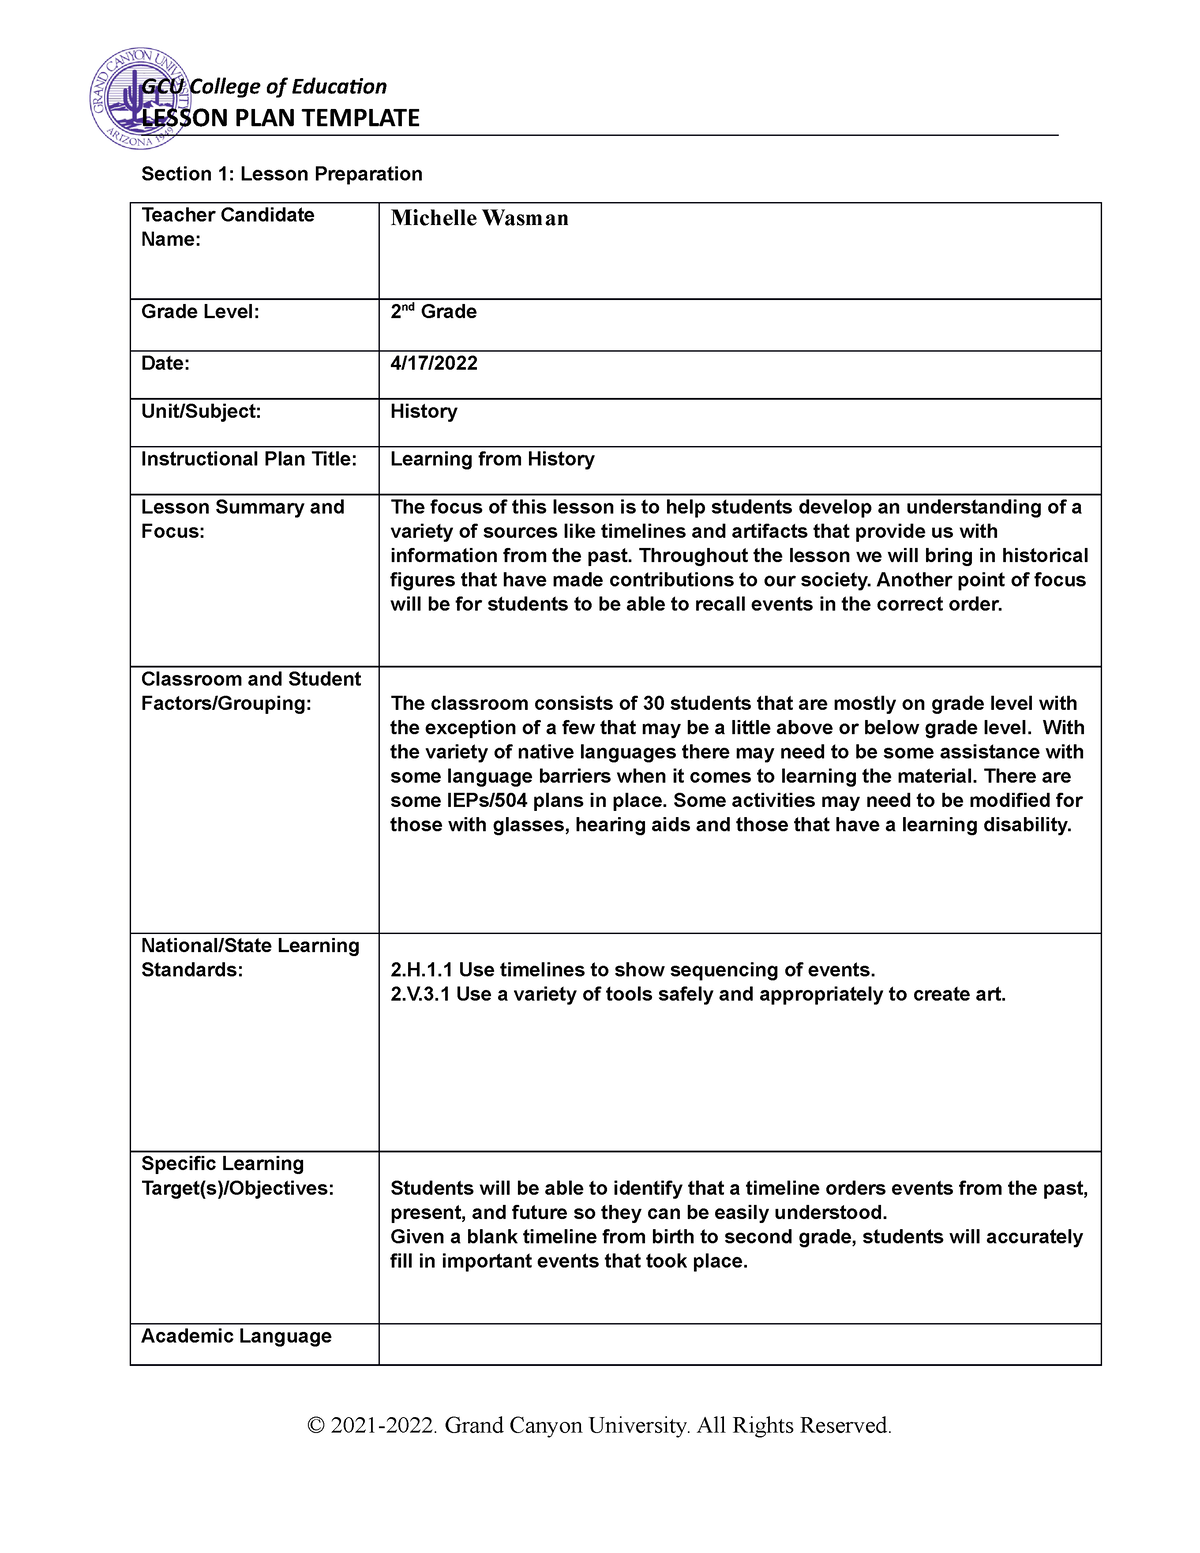 history-lesson-plan-lesson-plan-template-section-1-lesson